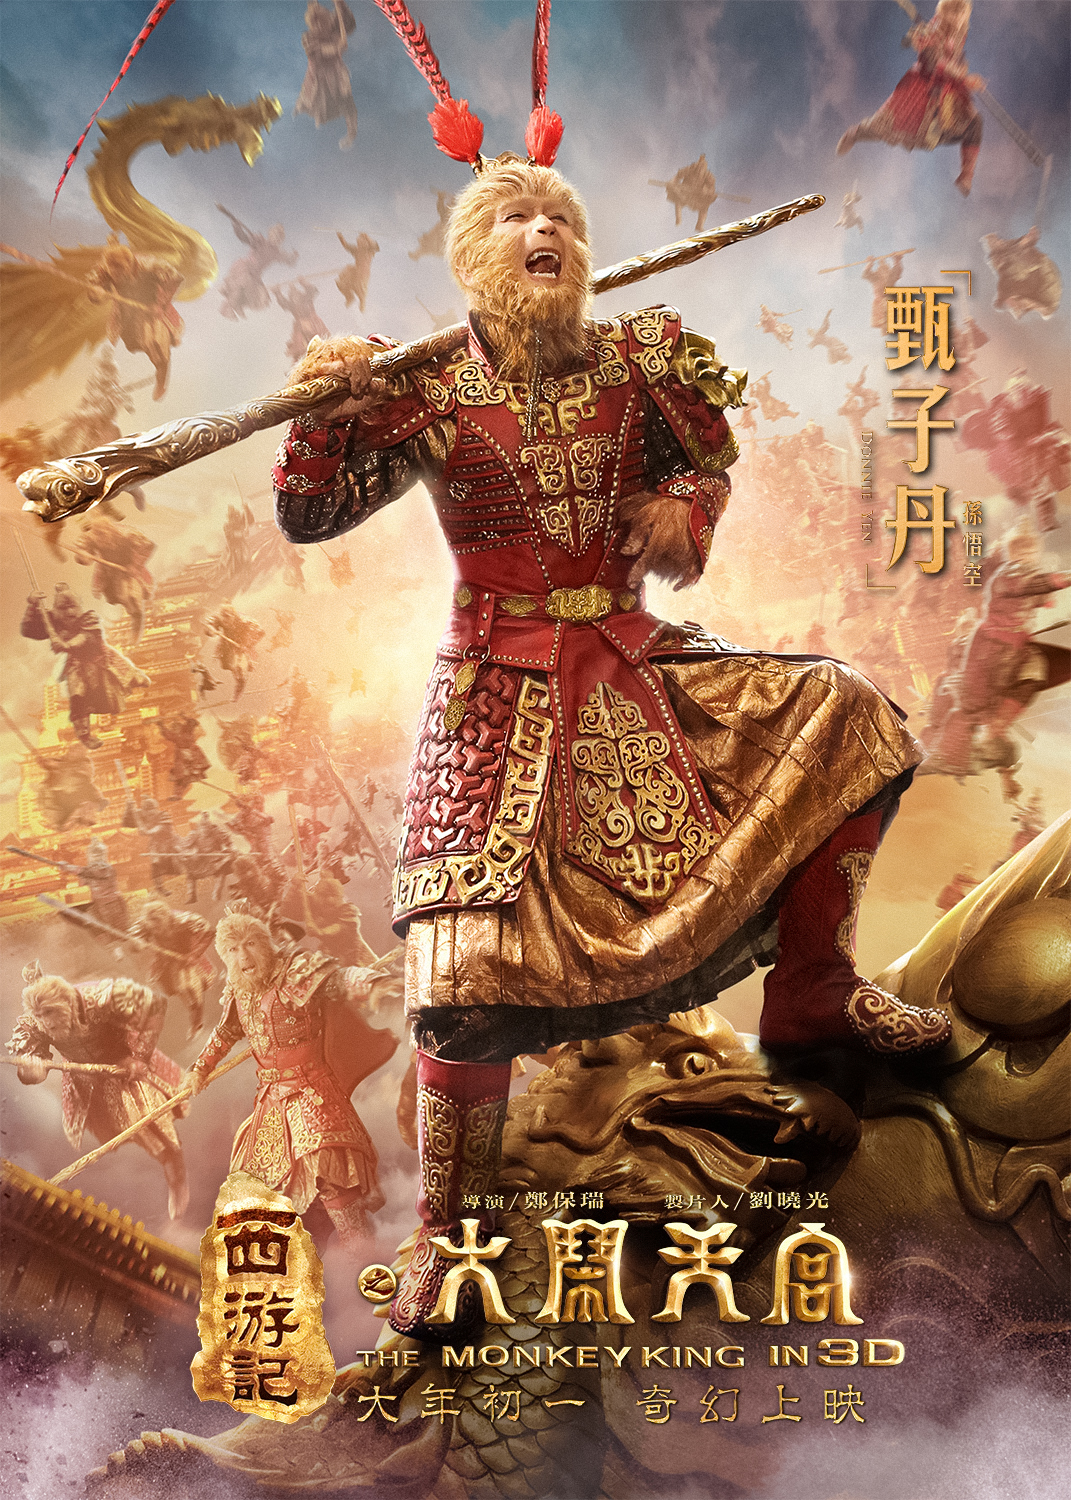 Get Behind The Scenes Of THE MONKEY KING With Donnie Yen Going Apeshit